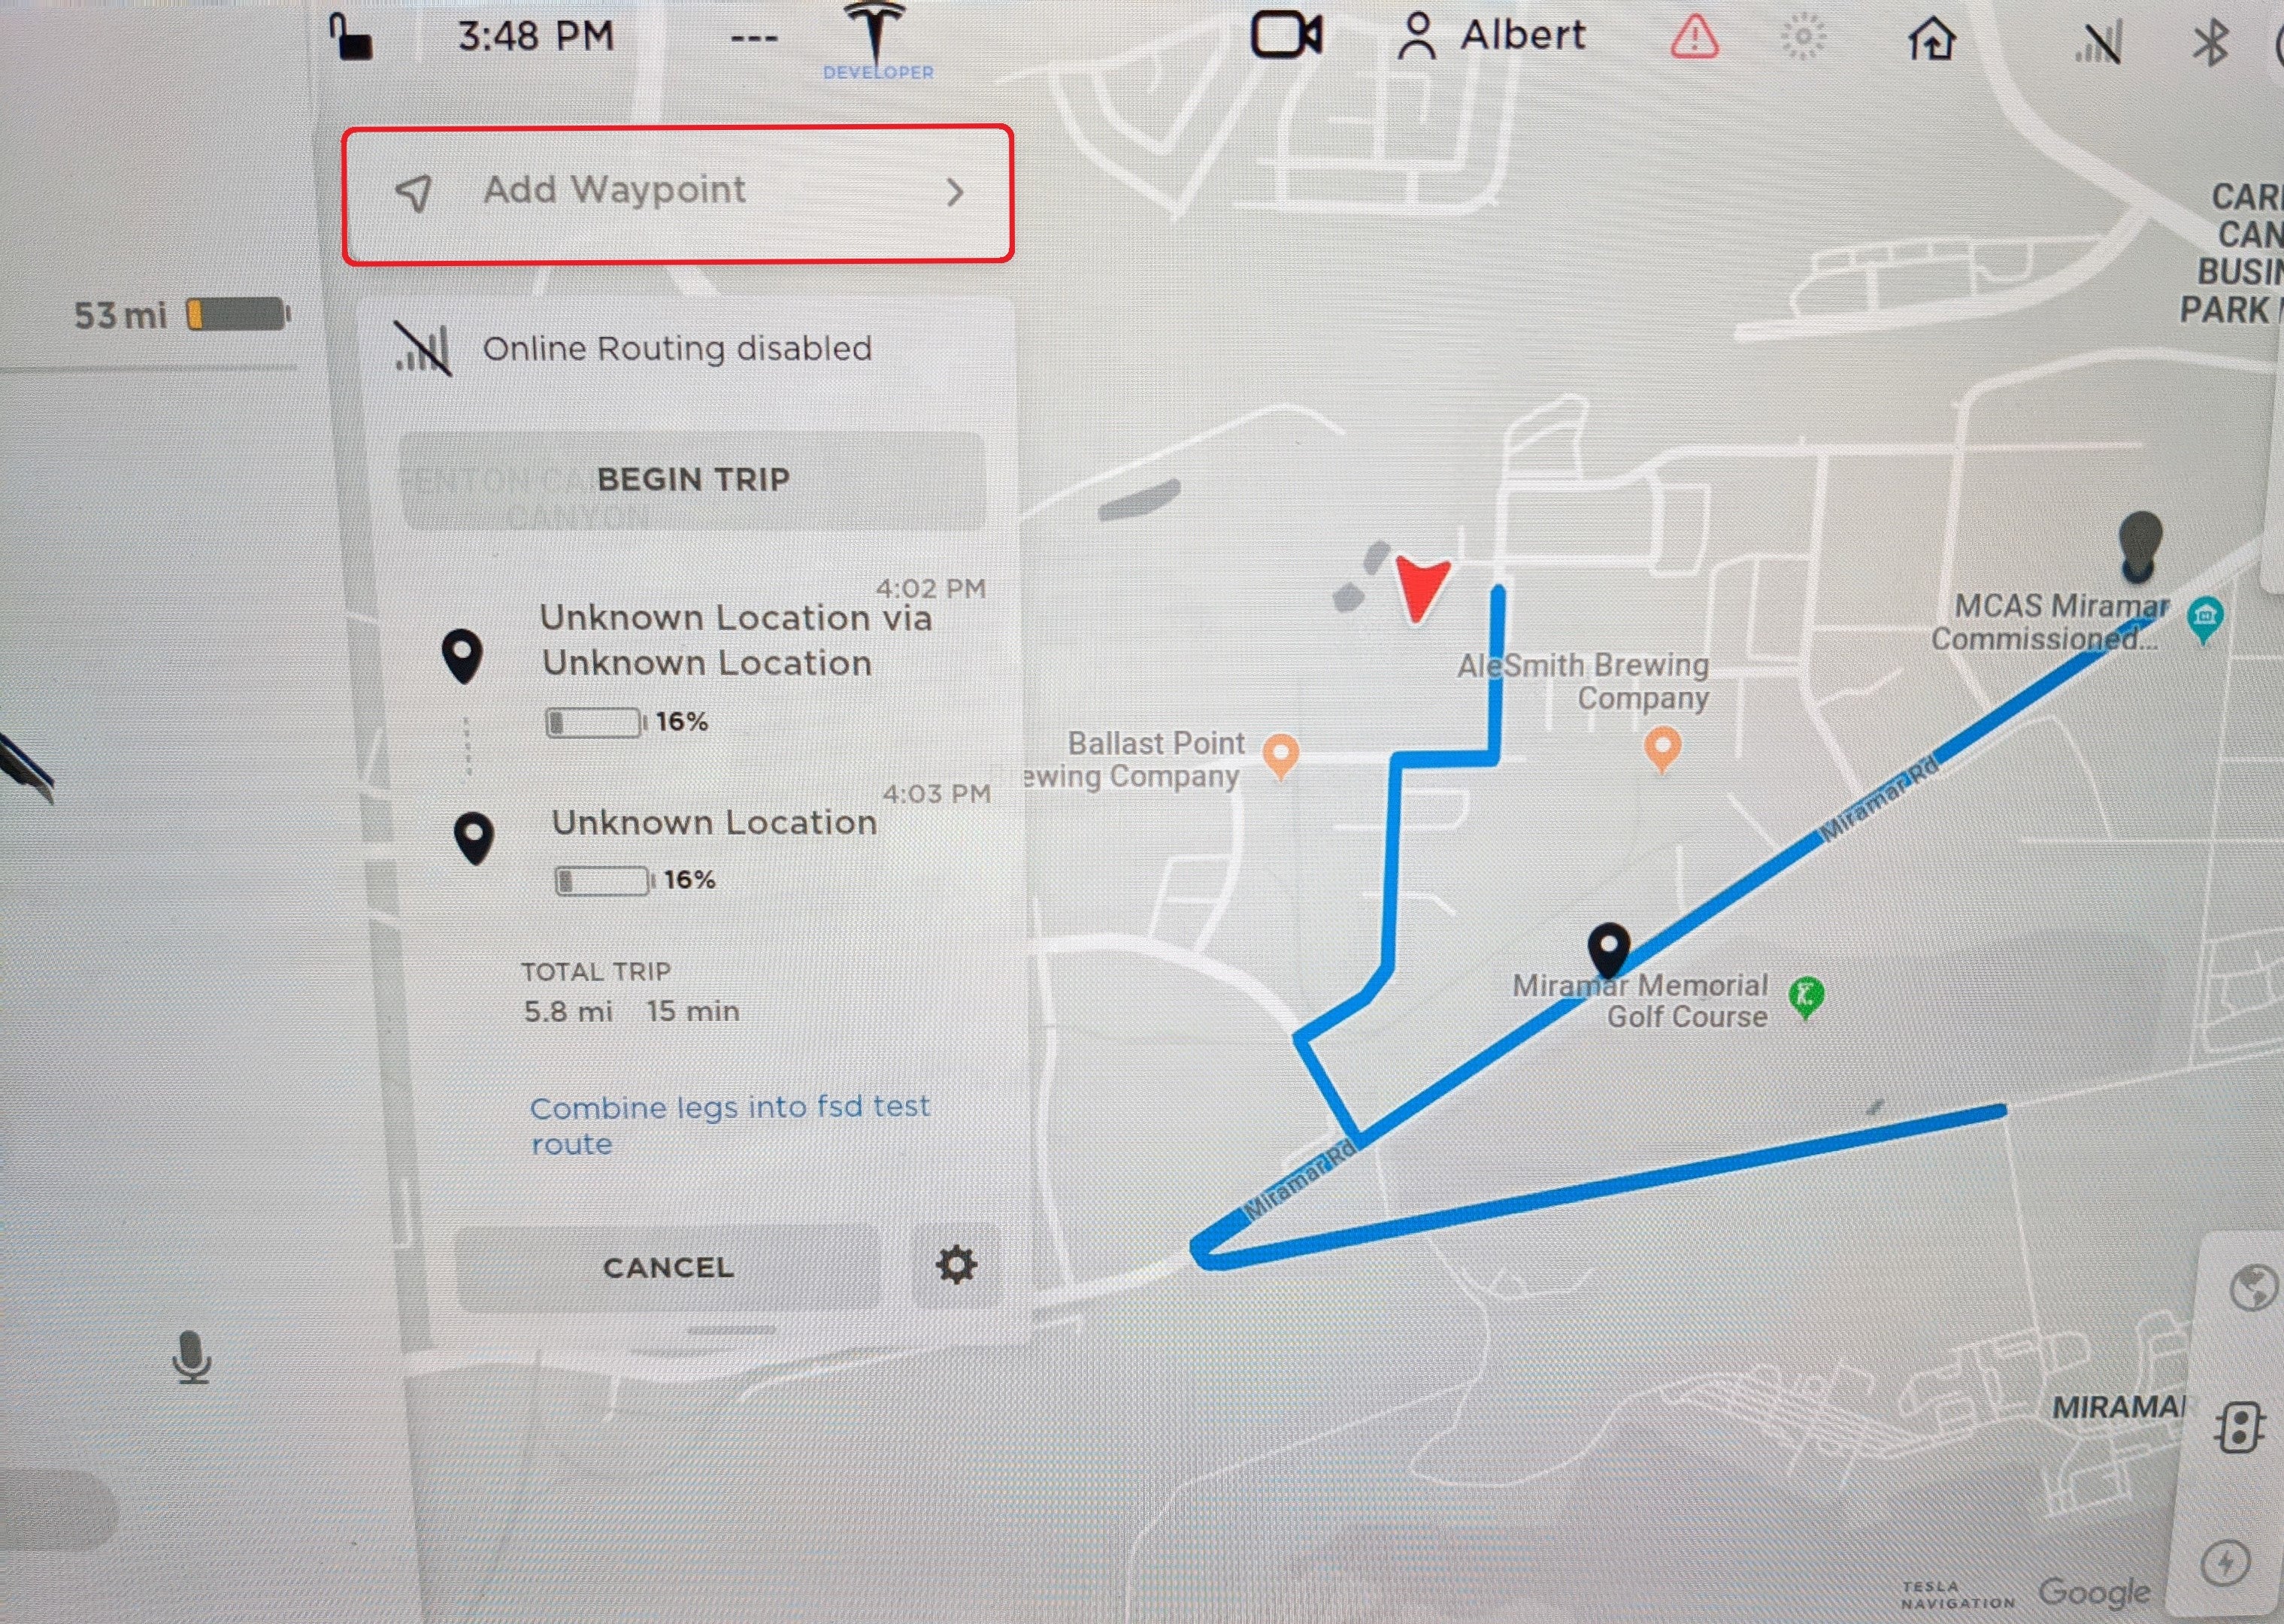 Tesla Navigation Waypoints Spotted in Coding, Could Be One of Elon Musk's Holiday OTA Presents